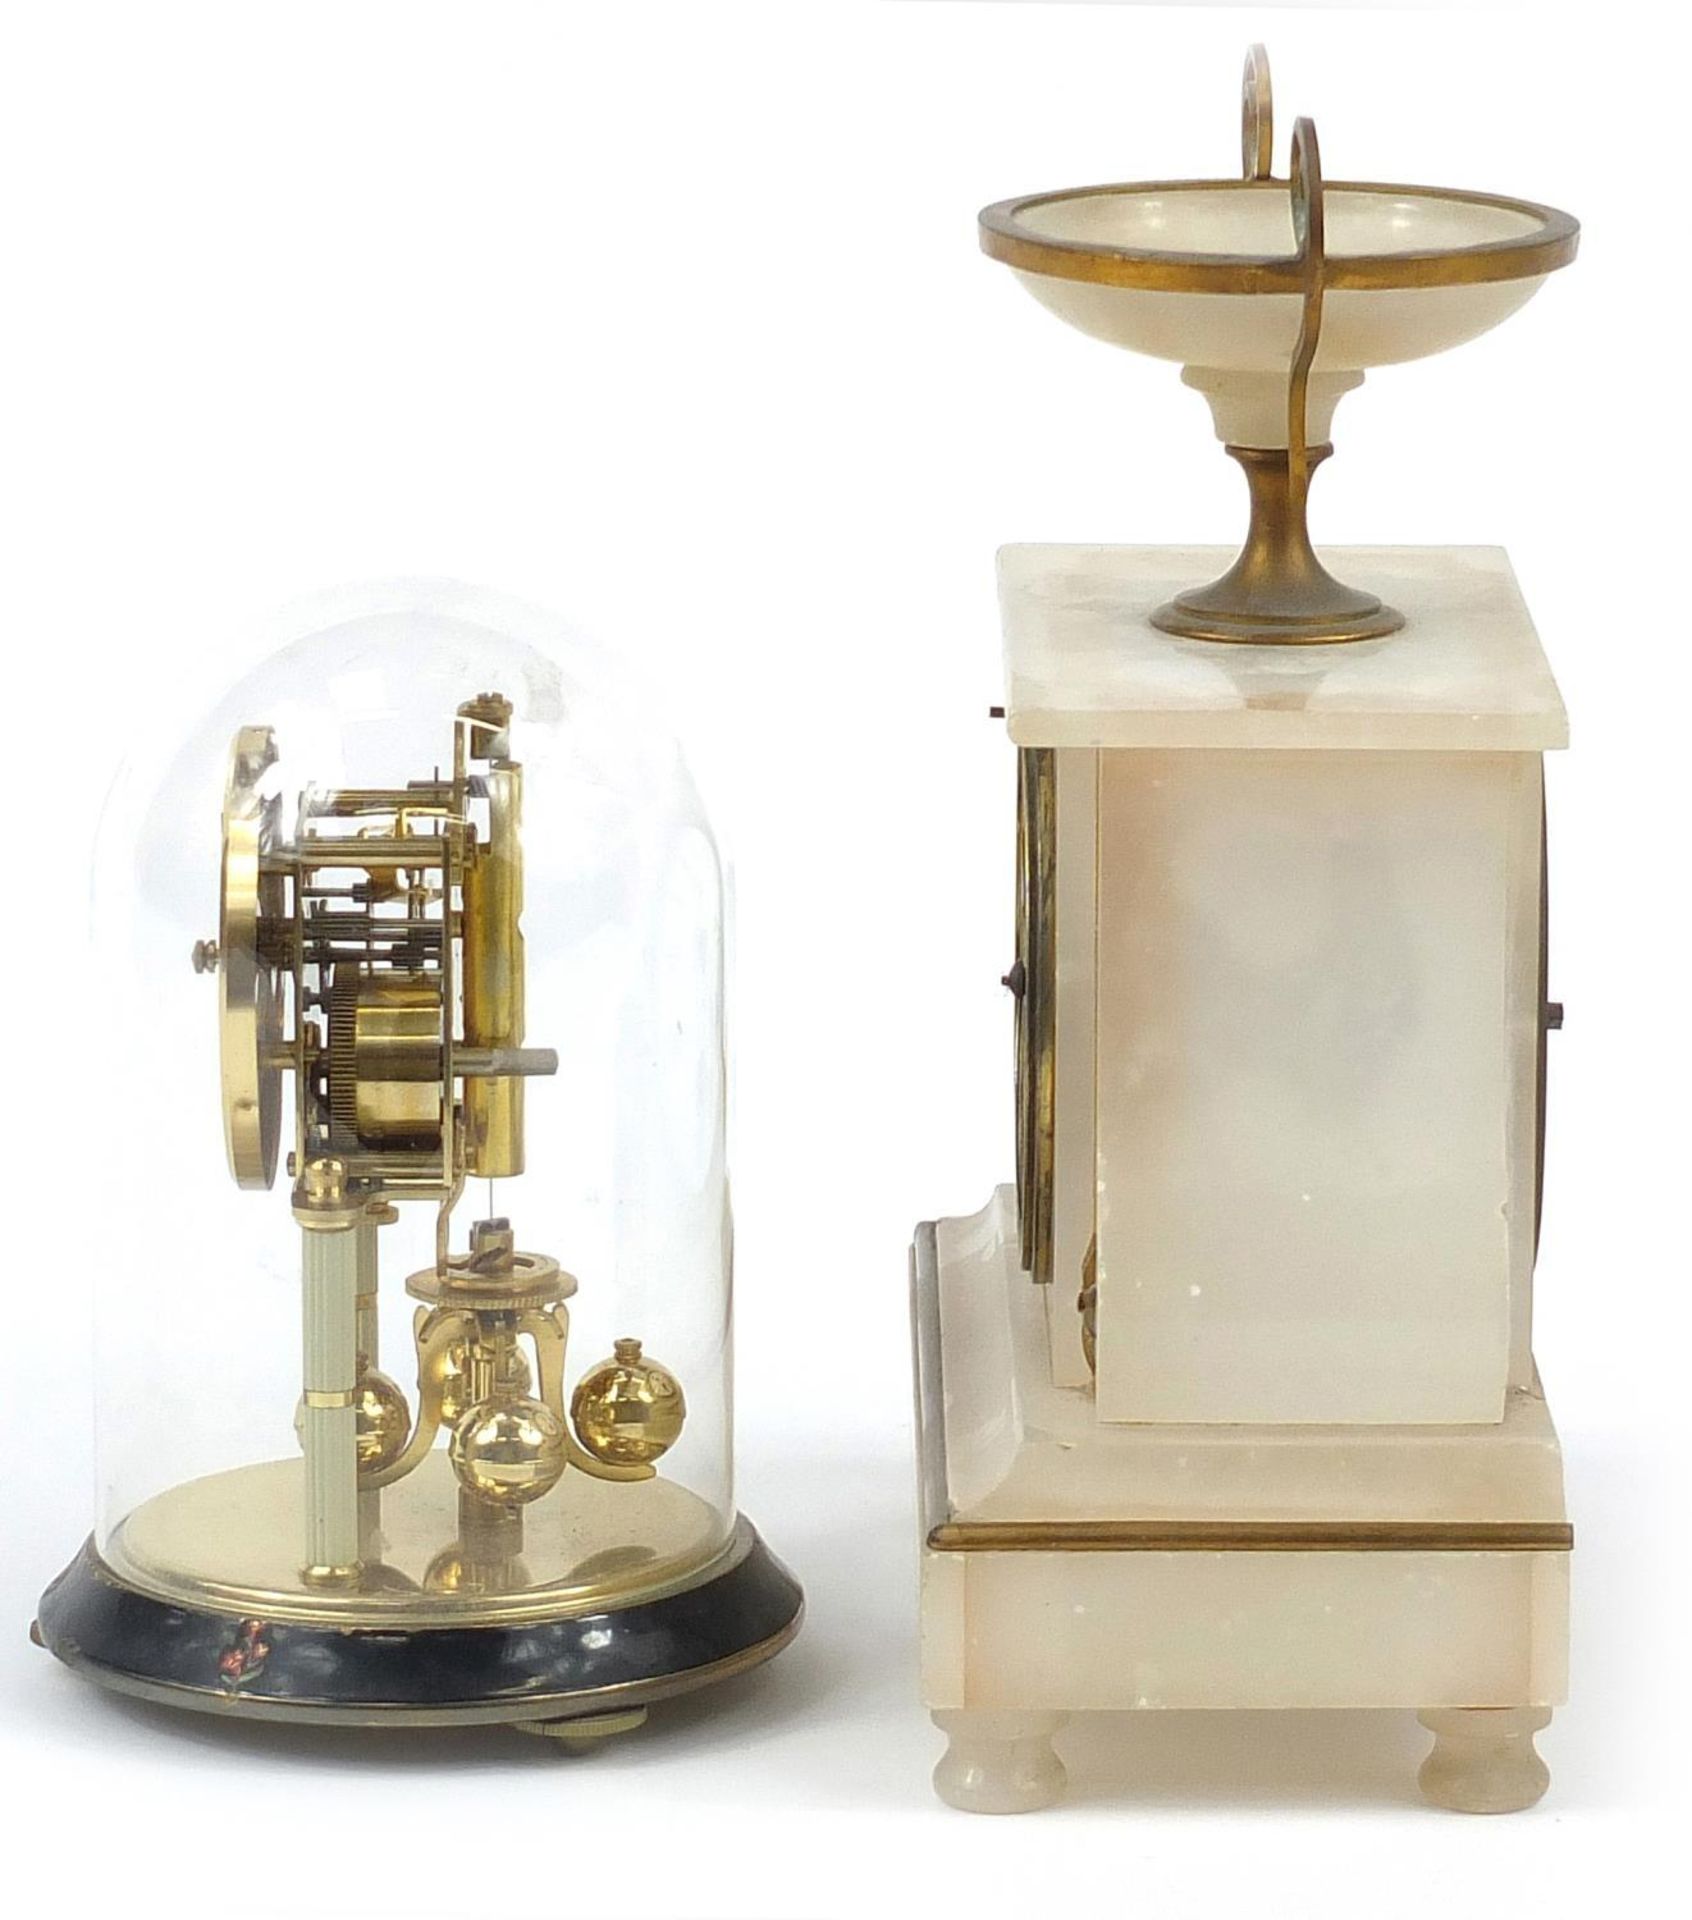 German brass anniversary clock and alabaster mantle clock with enamel dial, the largest 25.5cm high - Image 2 of 6